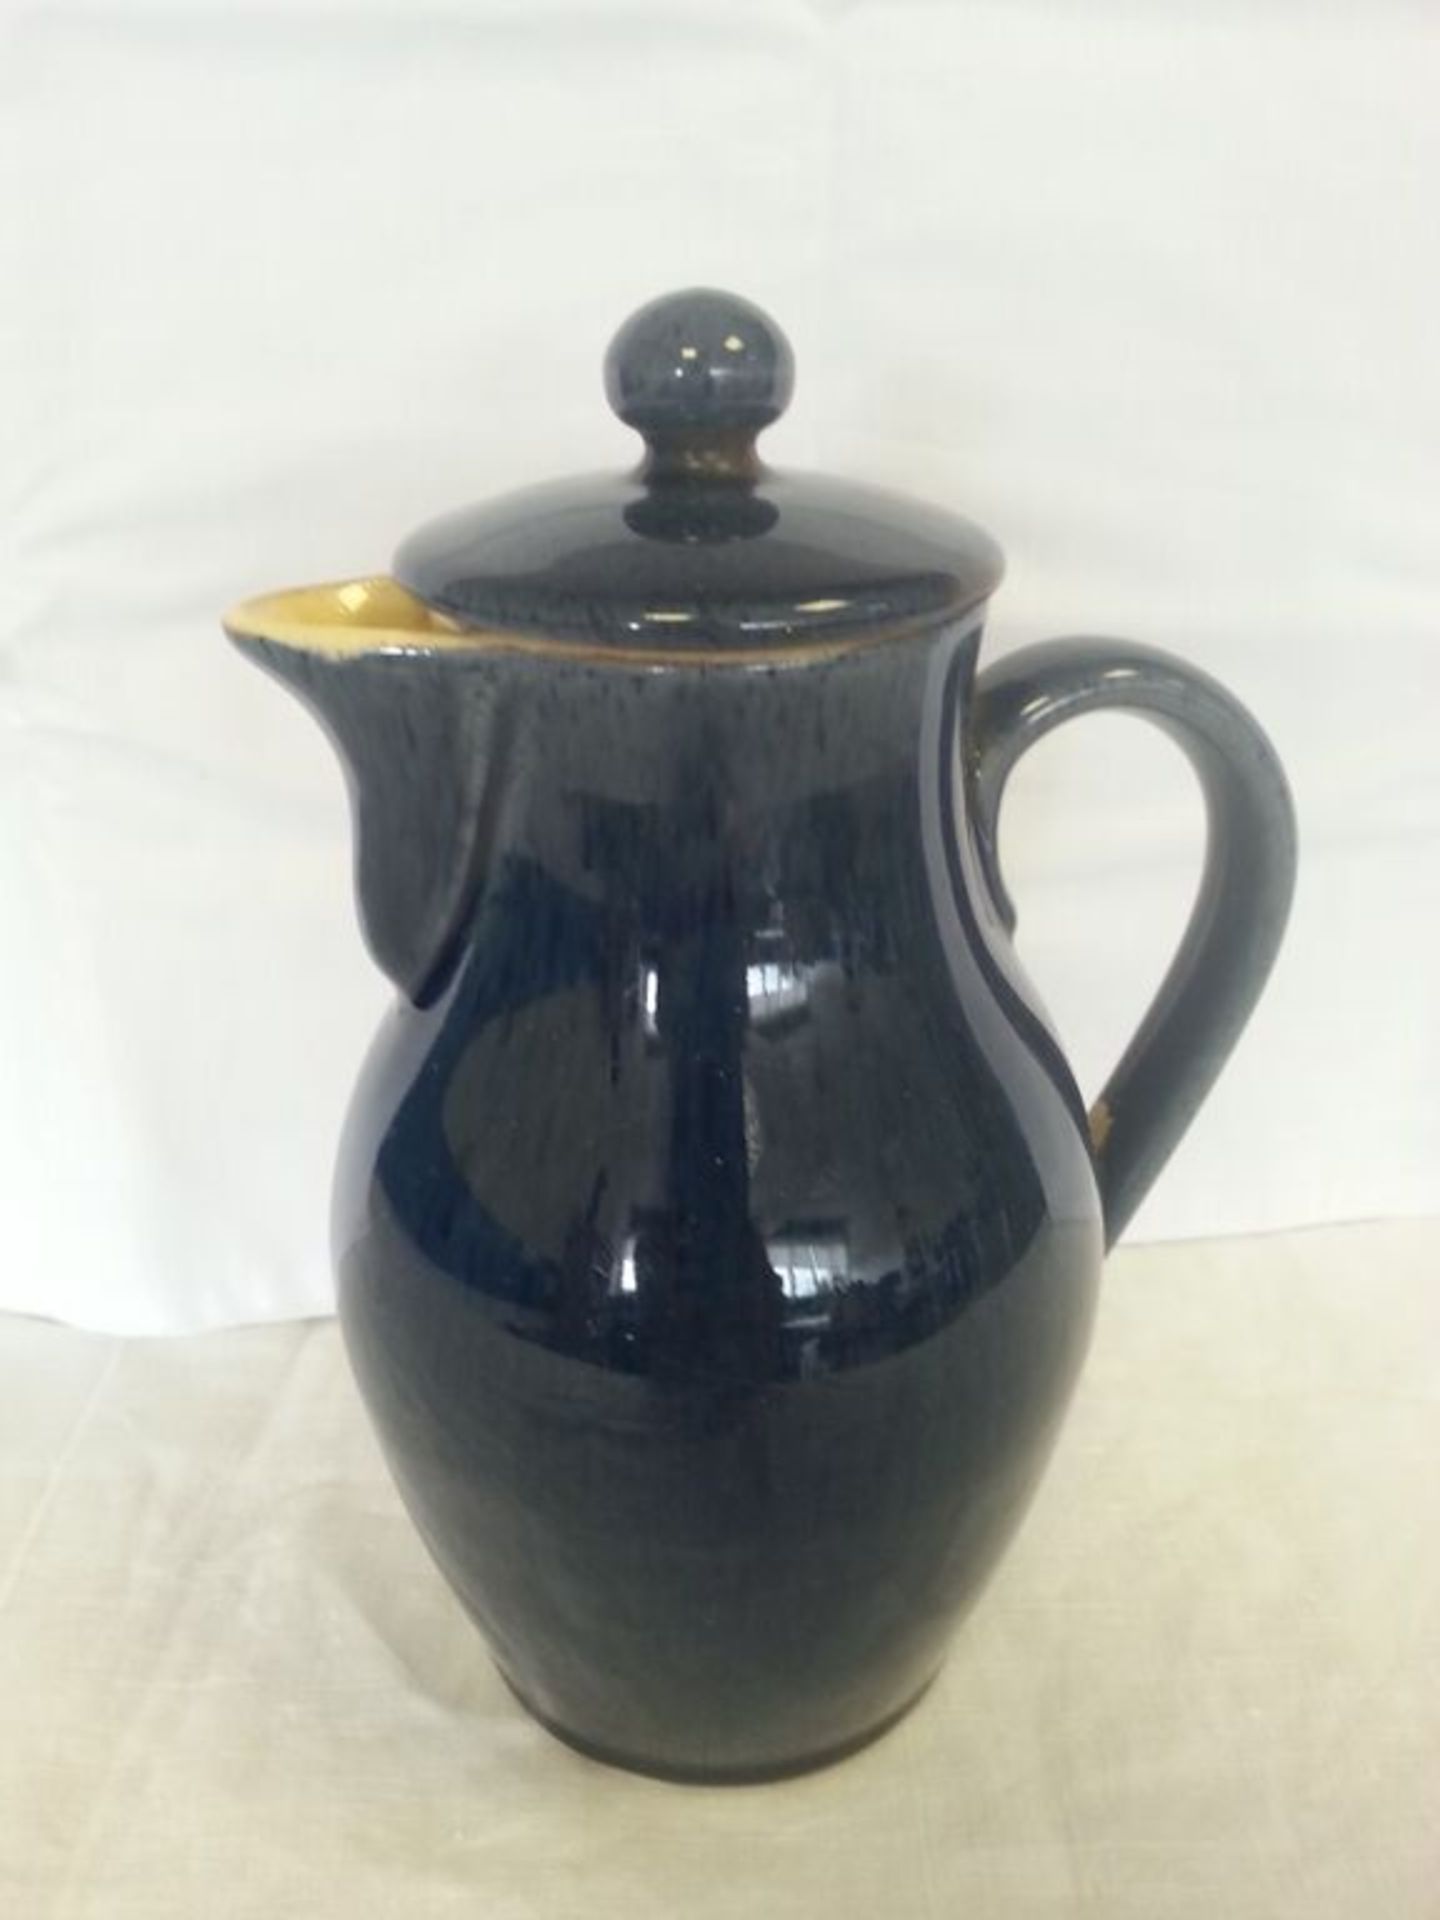 A Denby Stoneware Coffee Pot. Delivery Available. - No Reserve